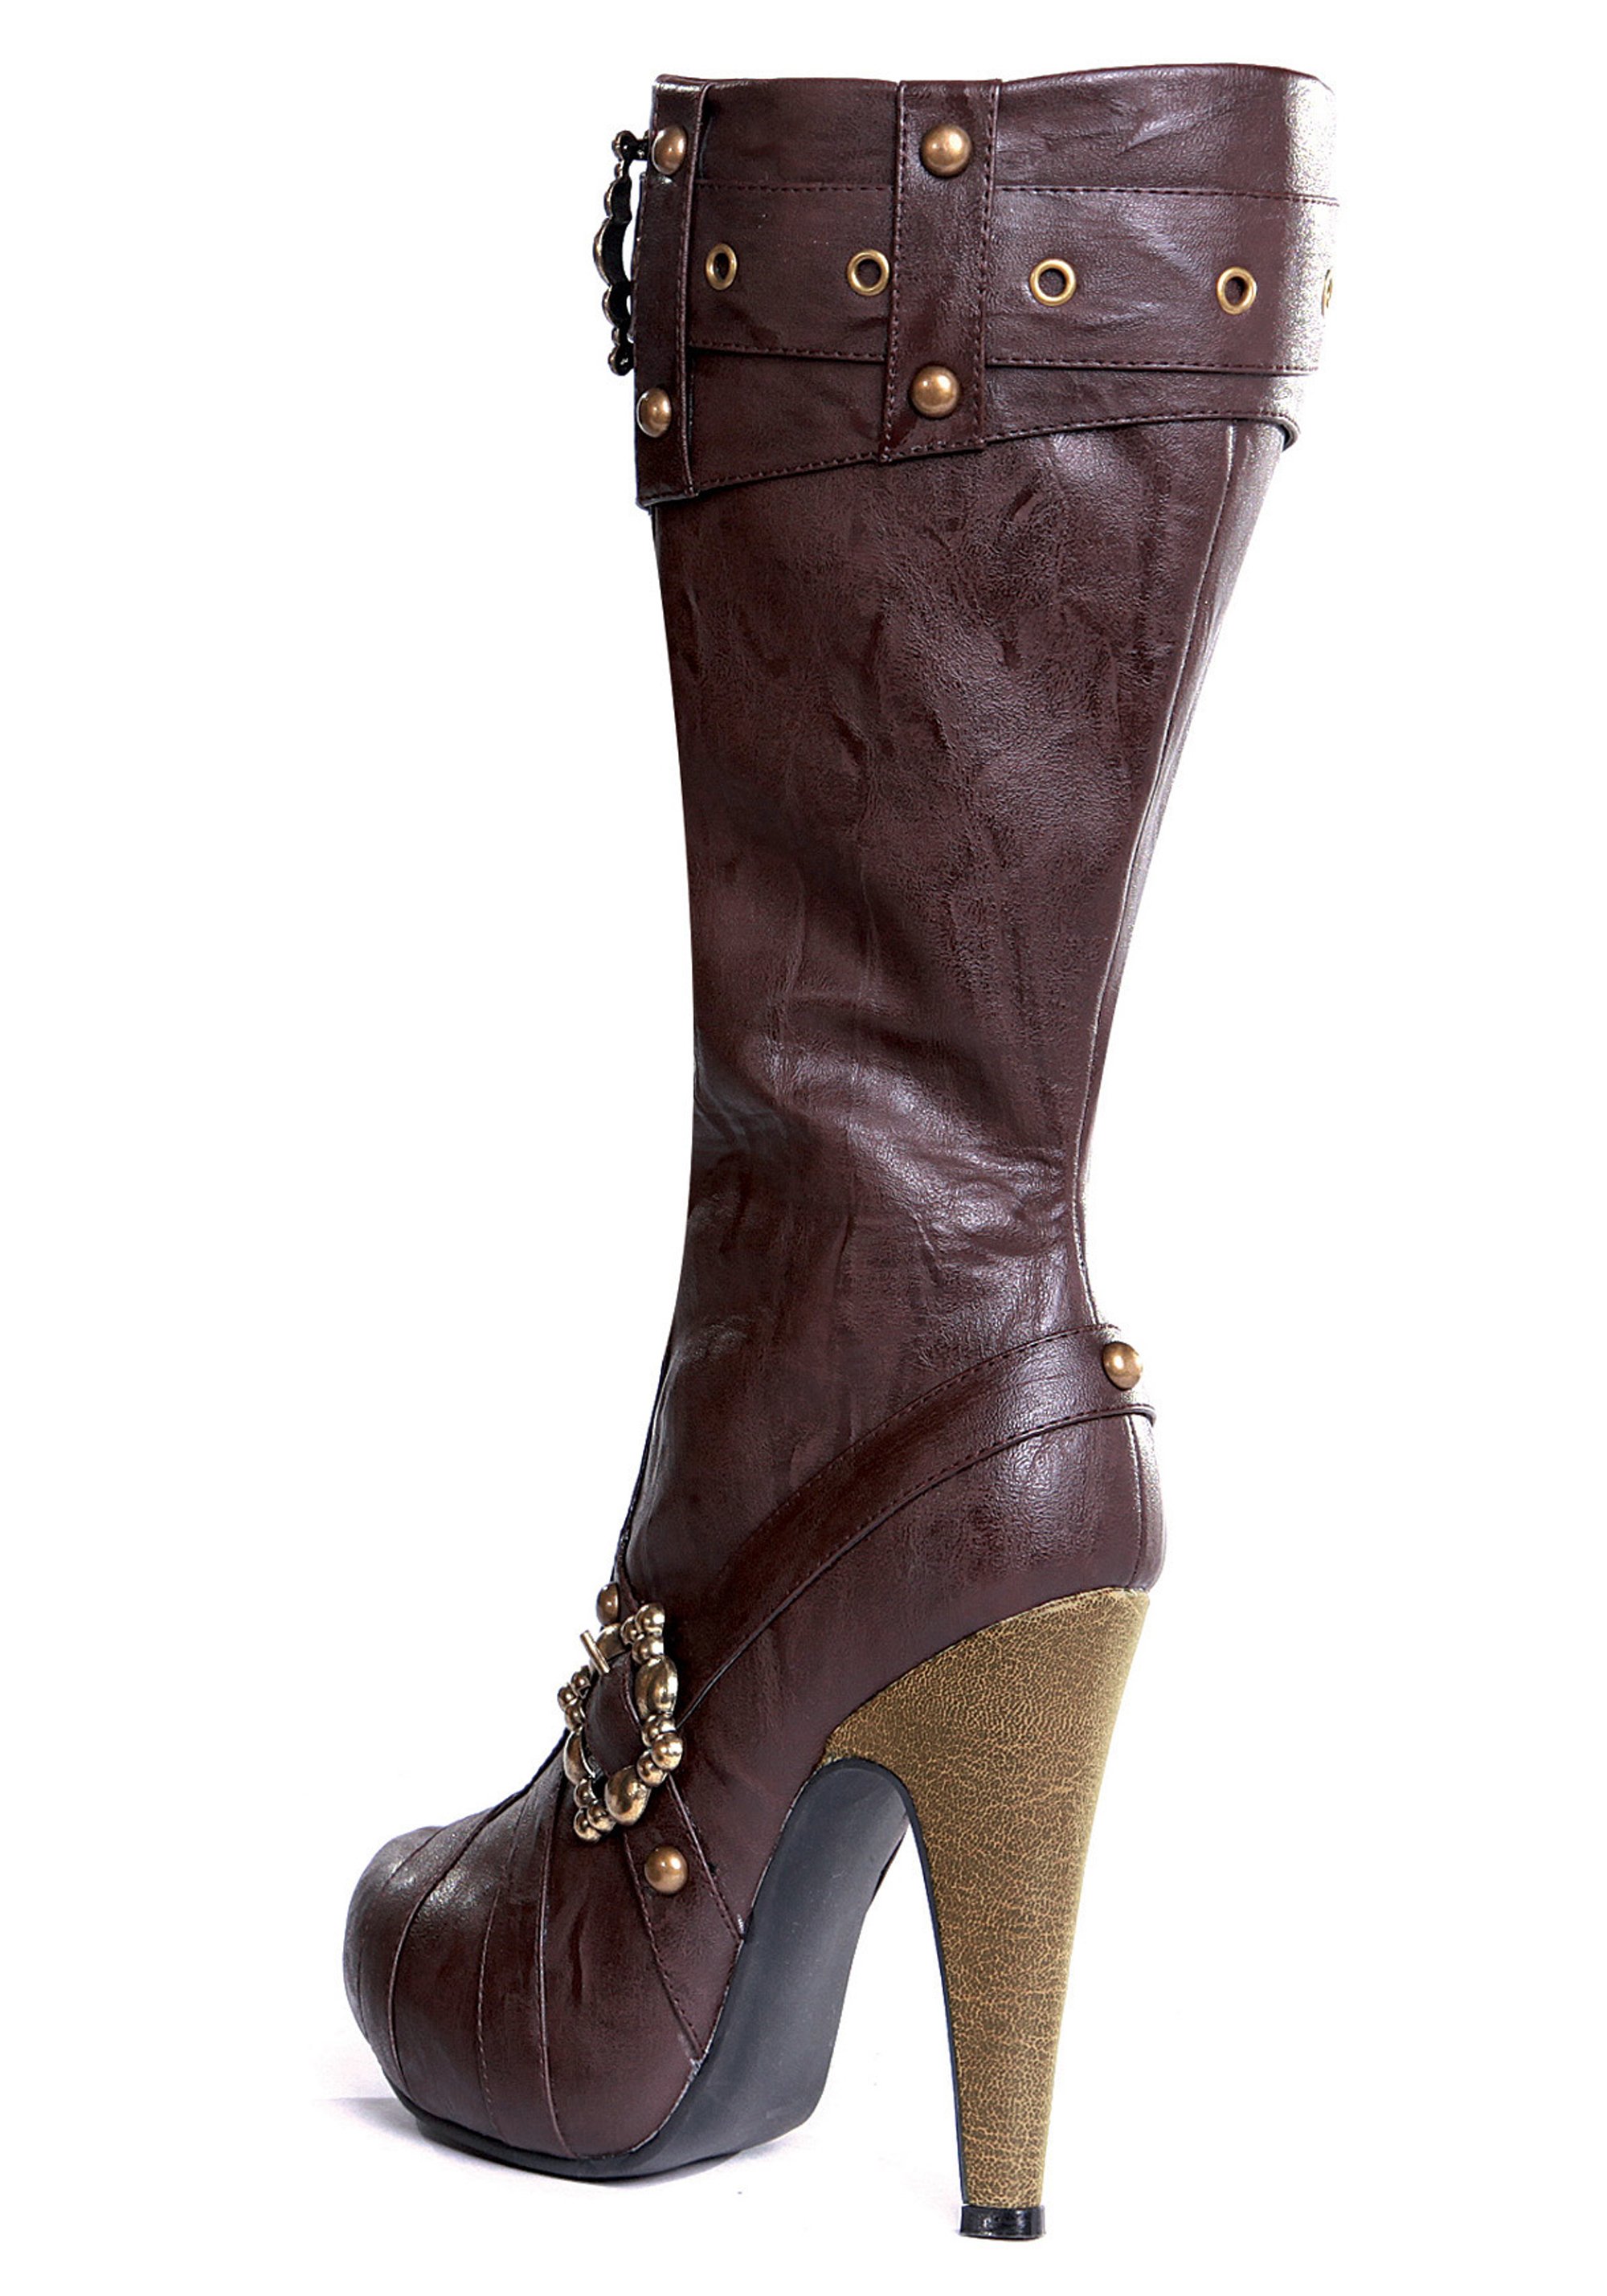 Incidente, evento Mecánica par Ellie Shoes 426-AUBREY 4 Inch Knee High Steampunk Boots With Buckles And  Studs | eBay